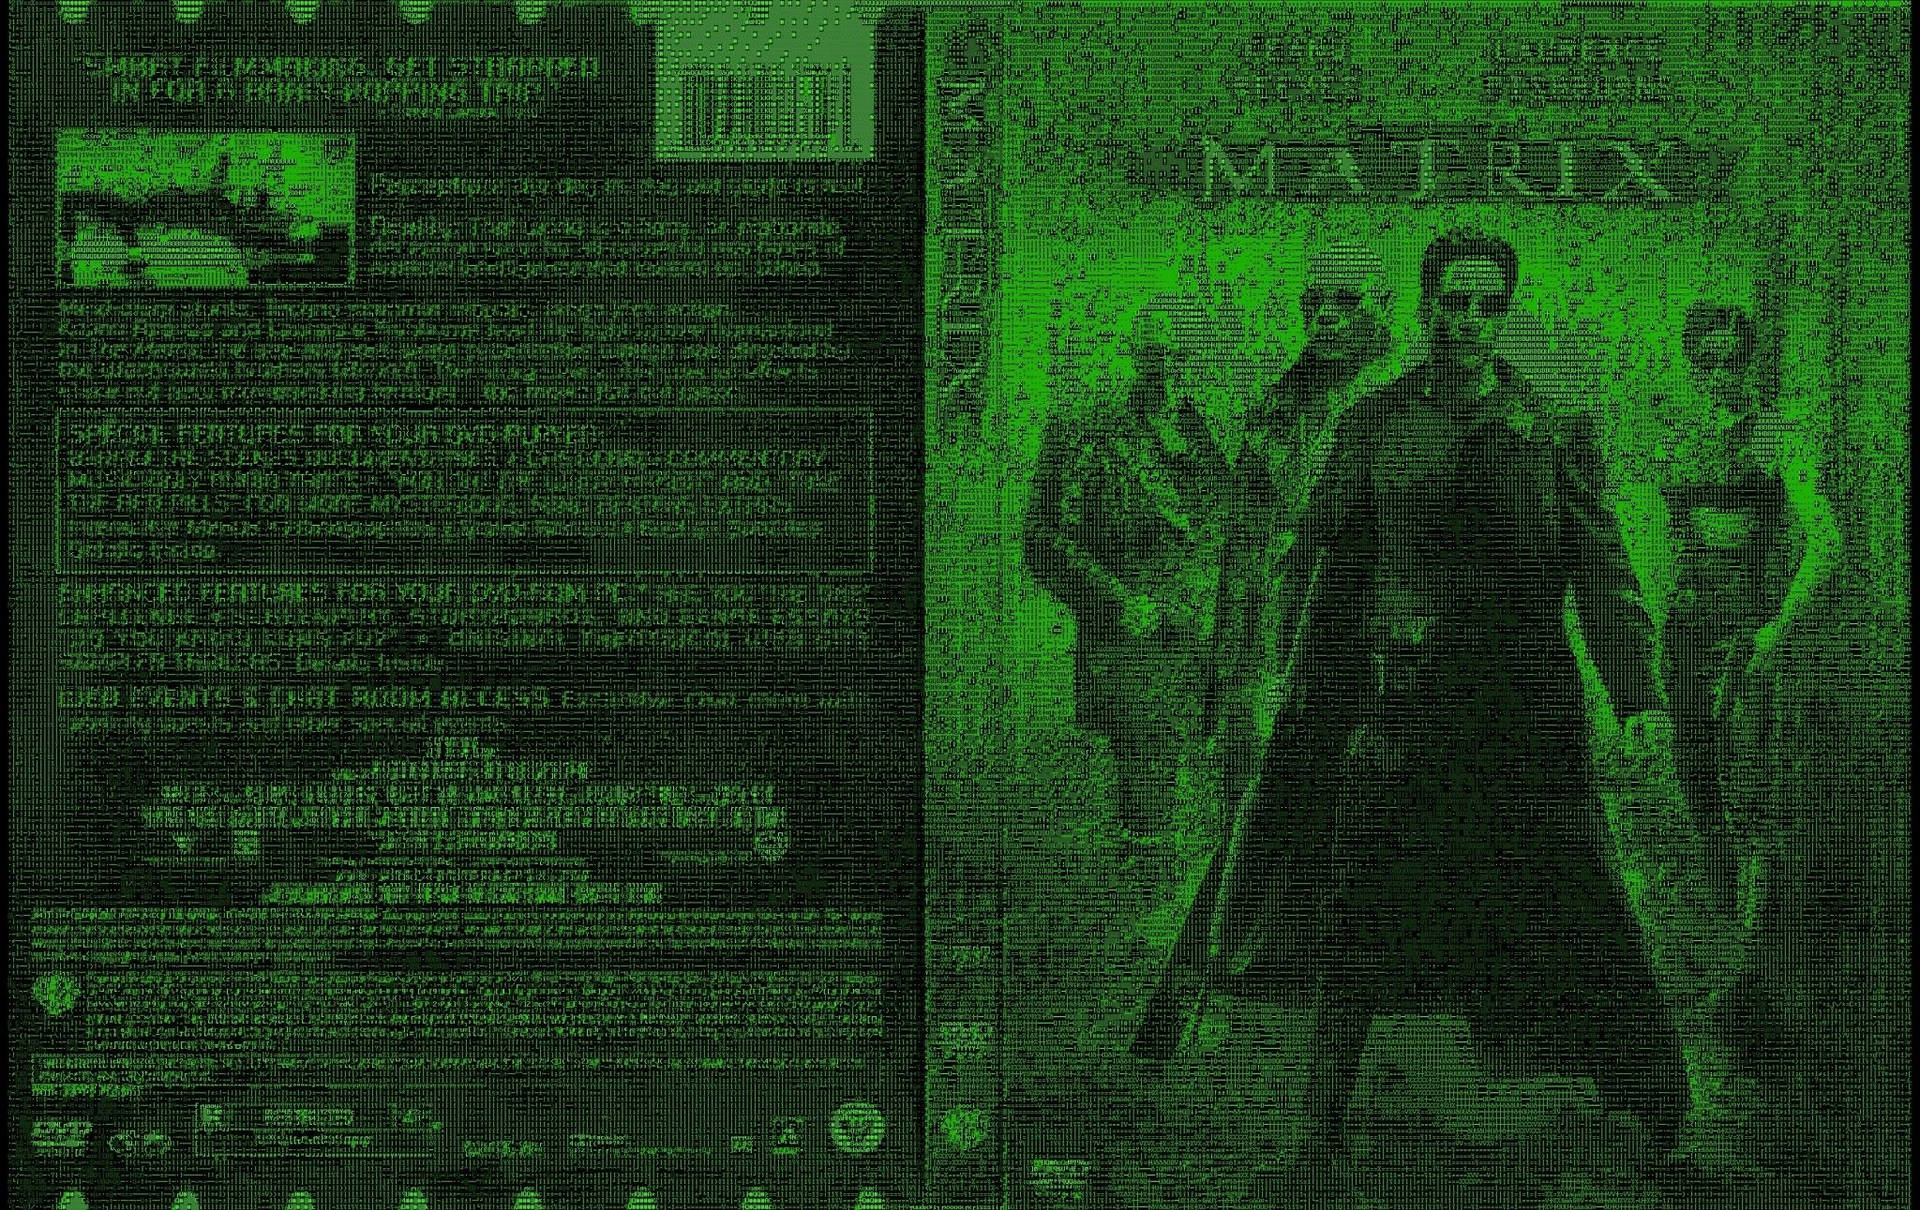 Step into a world of mystery and intrigue with The Matrix - DVD cover Wallpaper